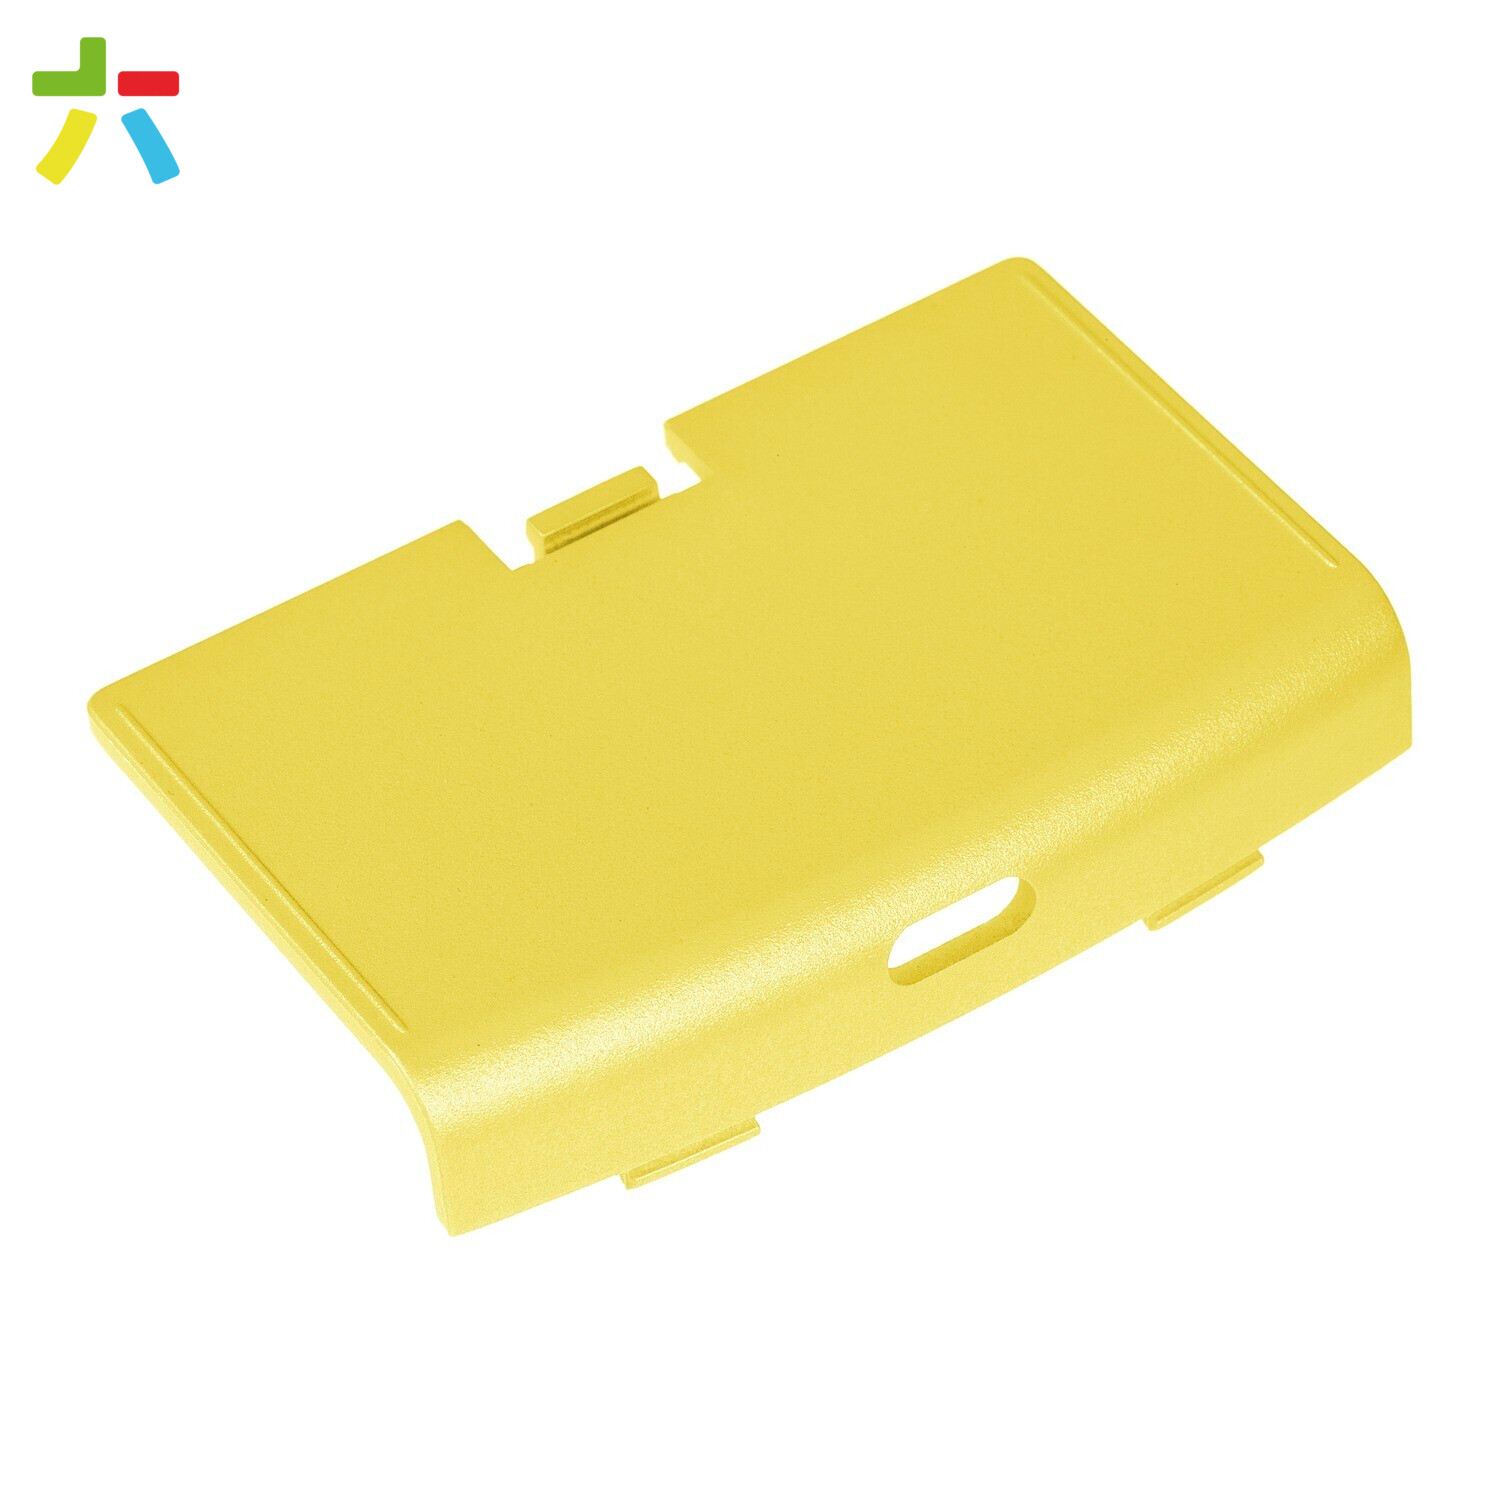 Game Boy Advance USB-C Battery Cover (Pearl Yellow - Soft Touch)